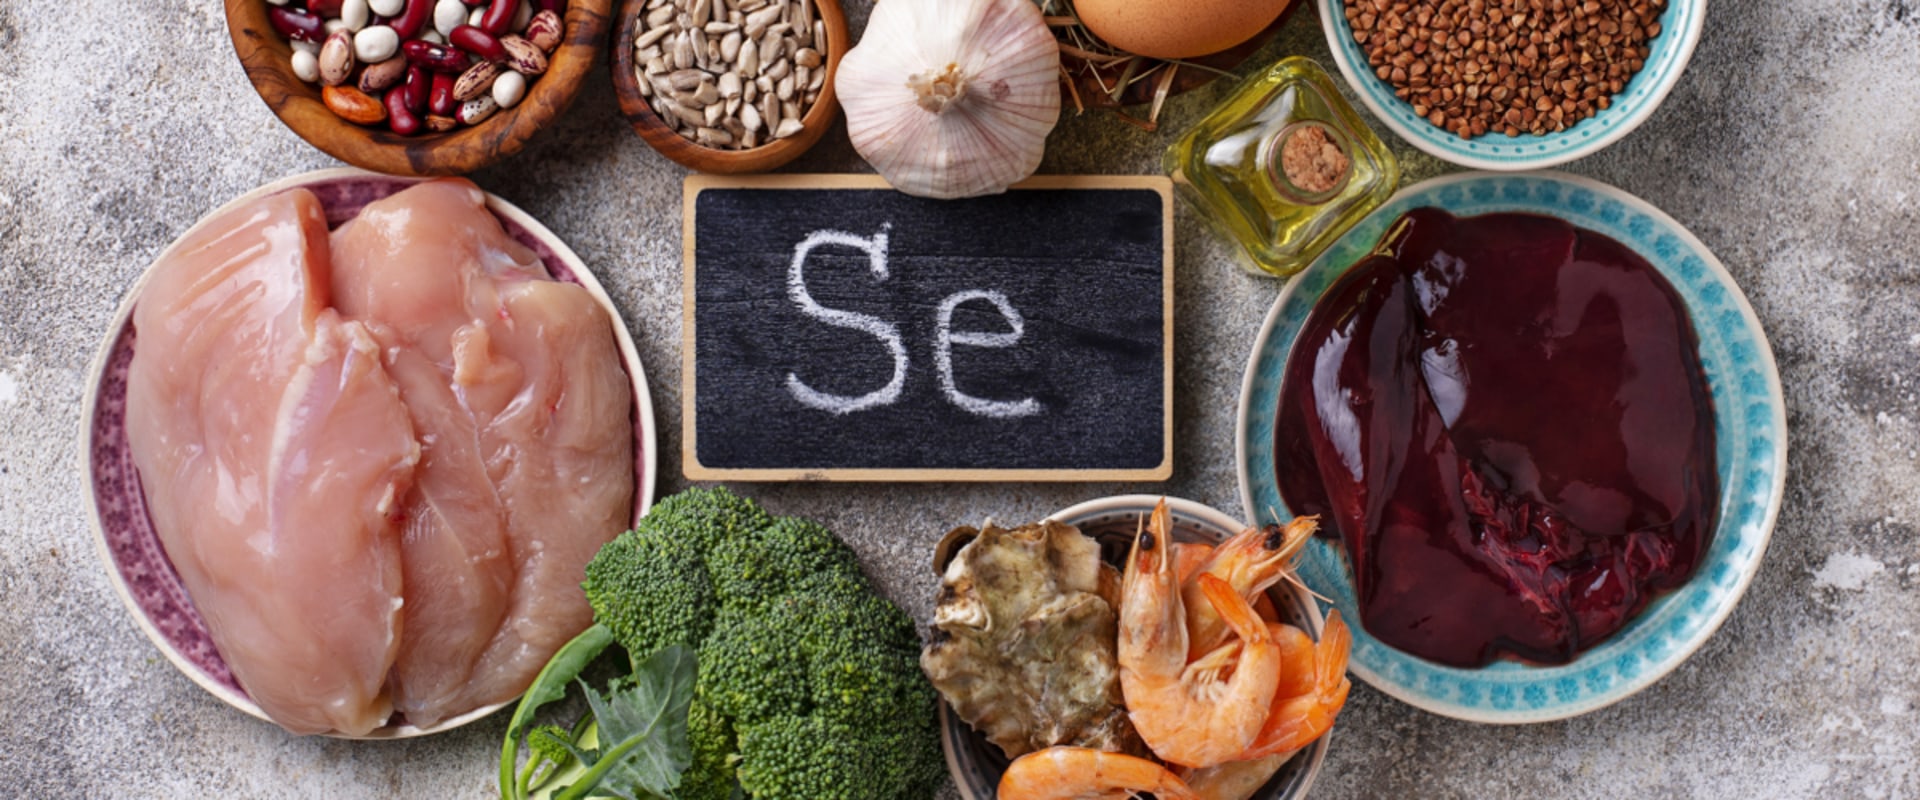 Selenium: An Overview of its Benefits and Uses